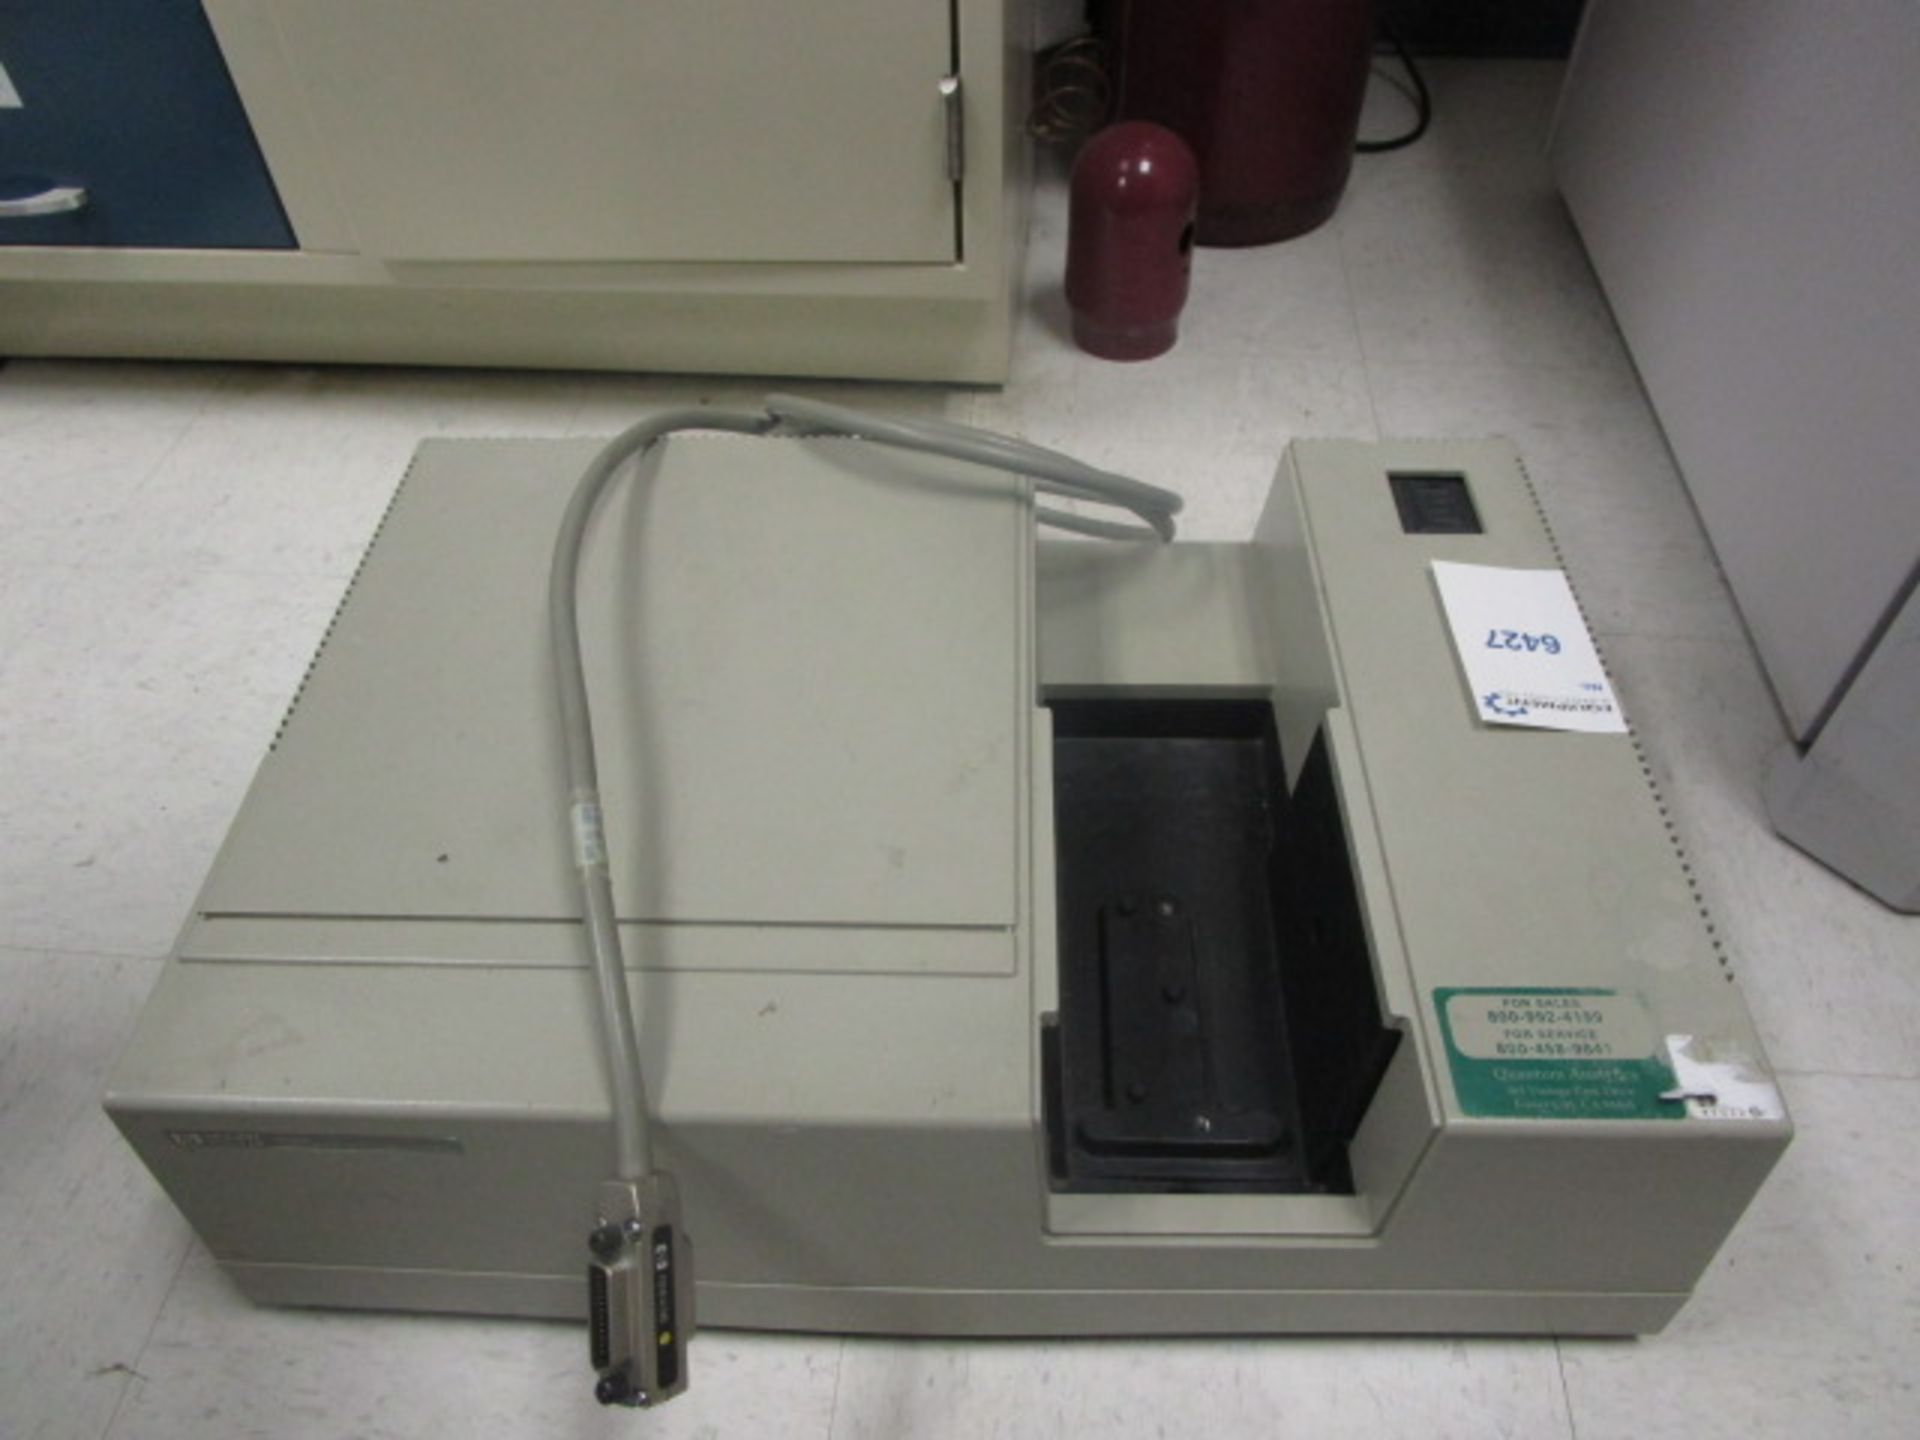 Hewlett Packard 8452 UV-Vis Spectro Photometer with gpib cable (for parts) - Image 3 of 6